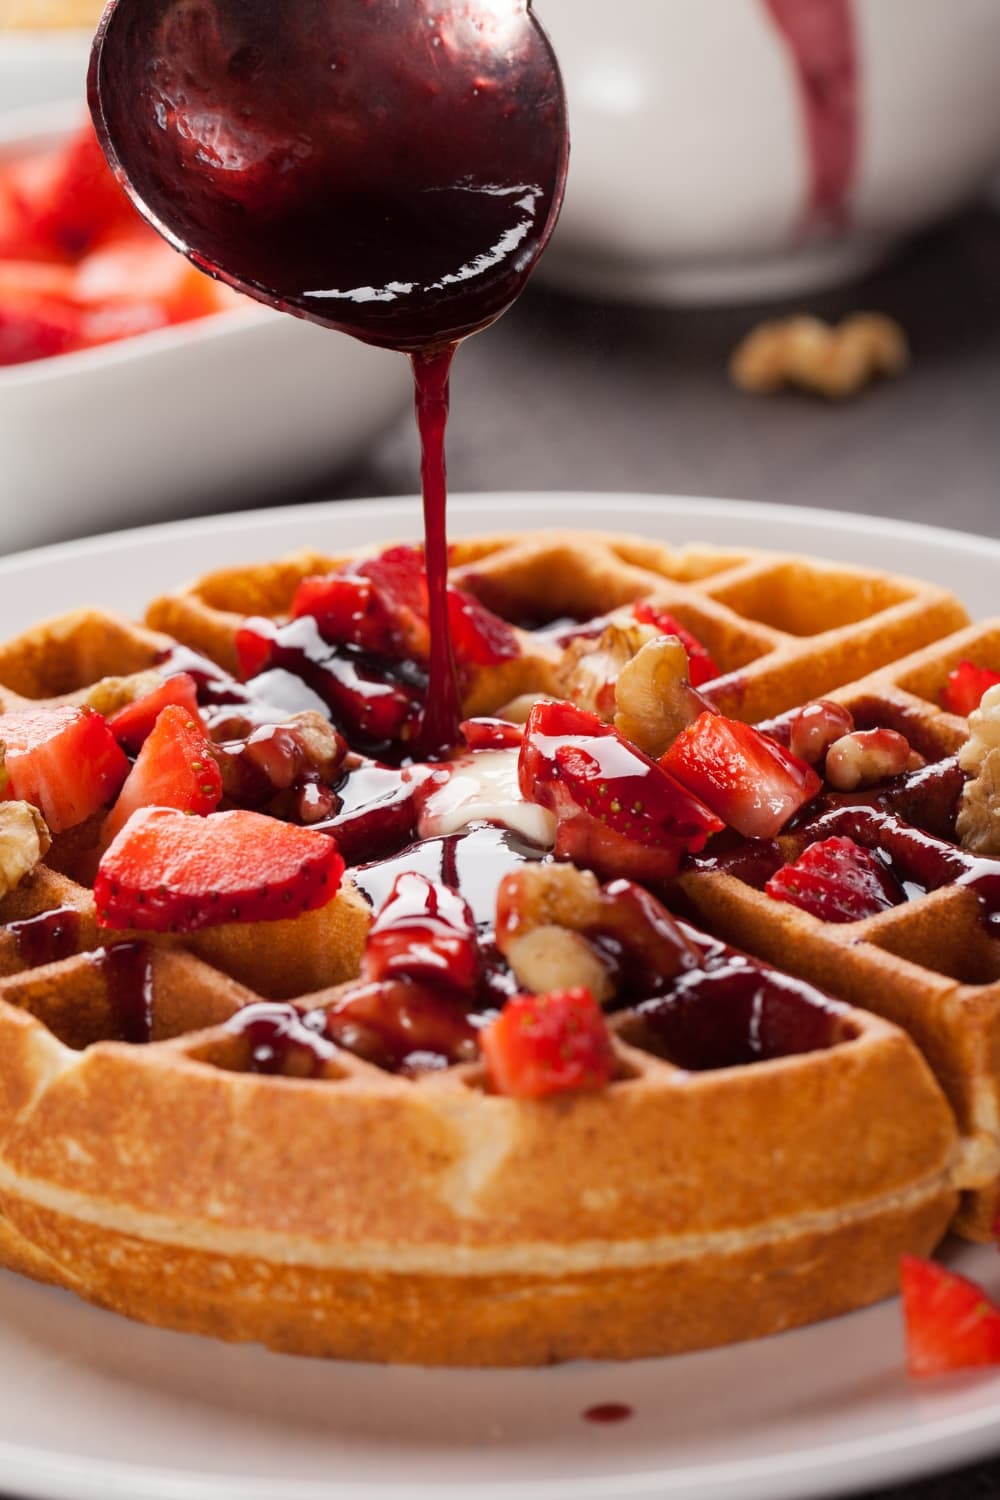 Belgian Waffle Topped With Sliced Berries, Drizzled With Syrup